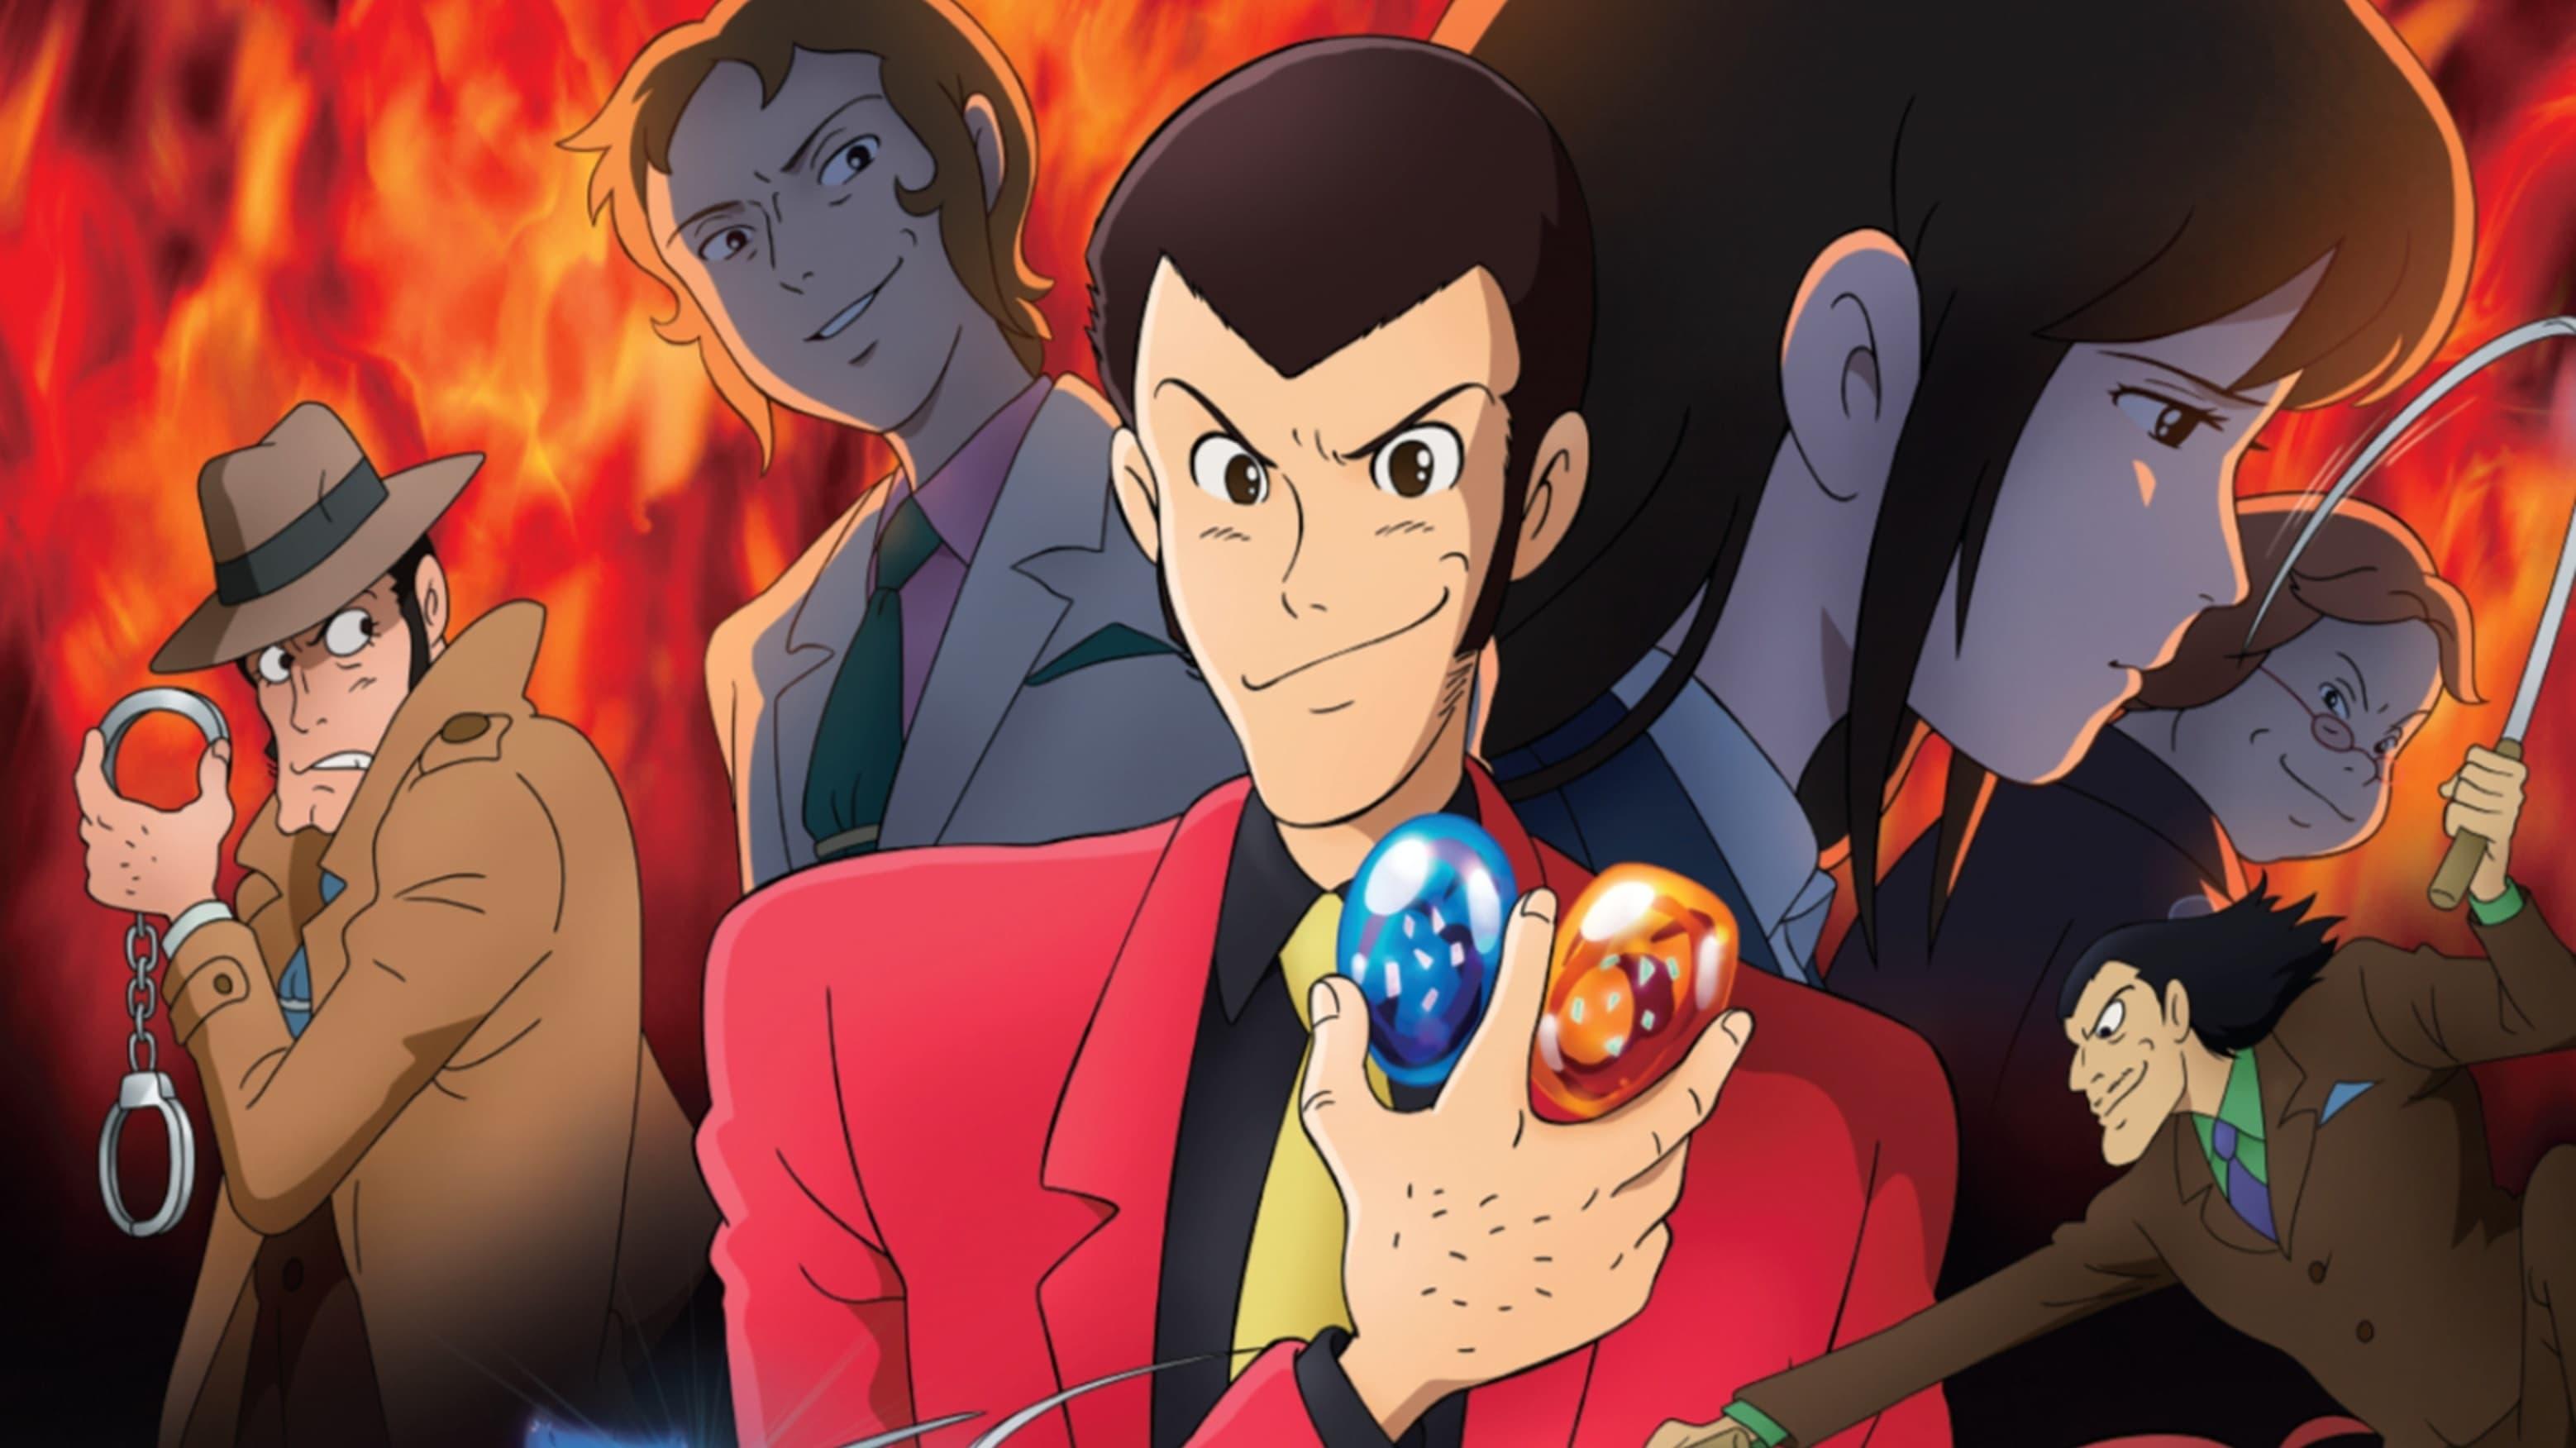 Lupin the Third: Blood Seal of the Eternal Mermaid backdrop